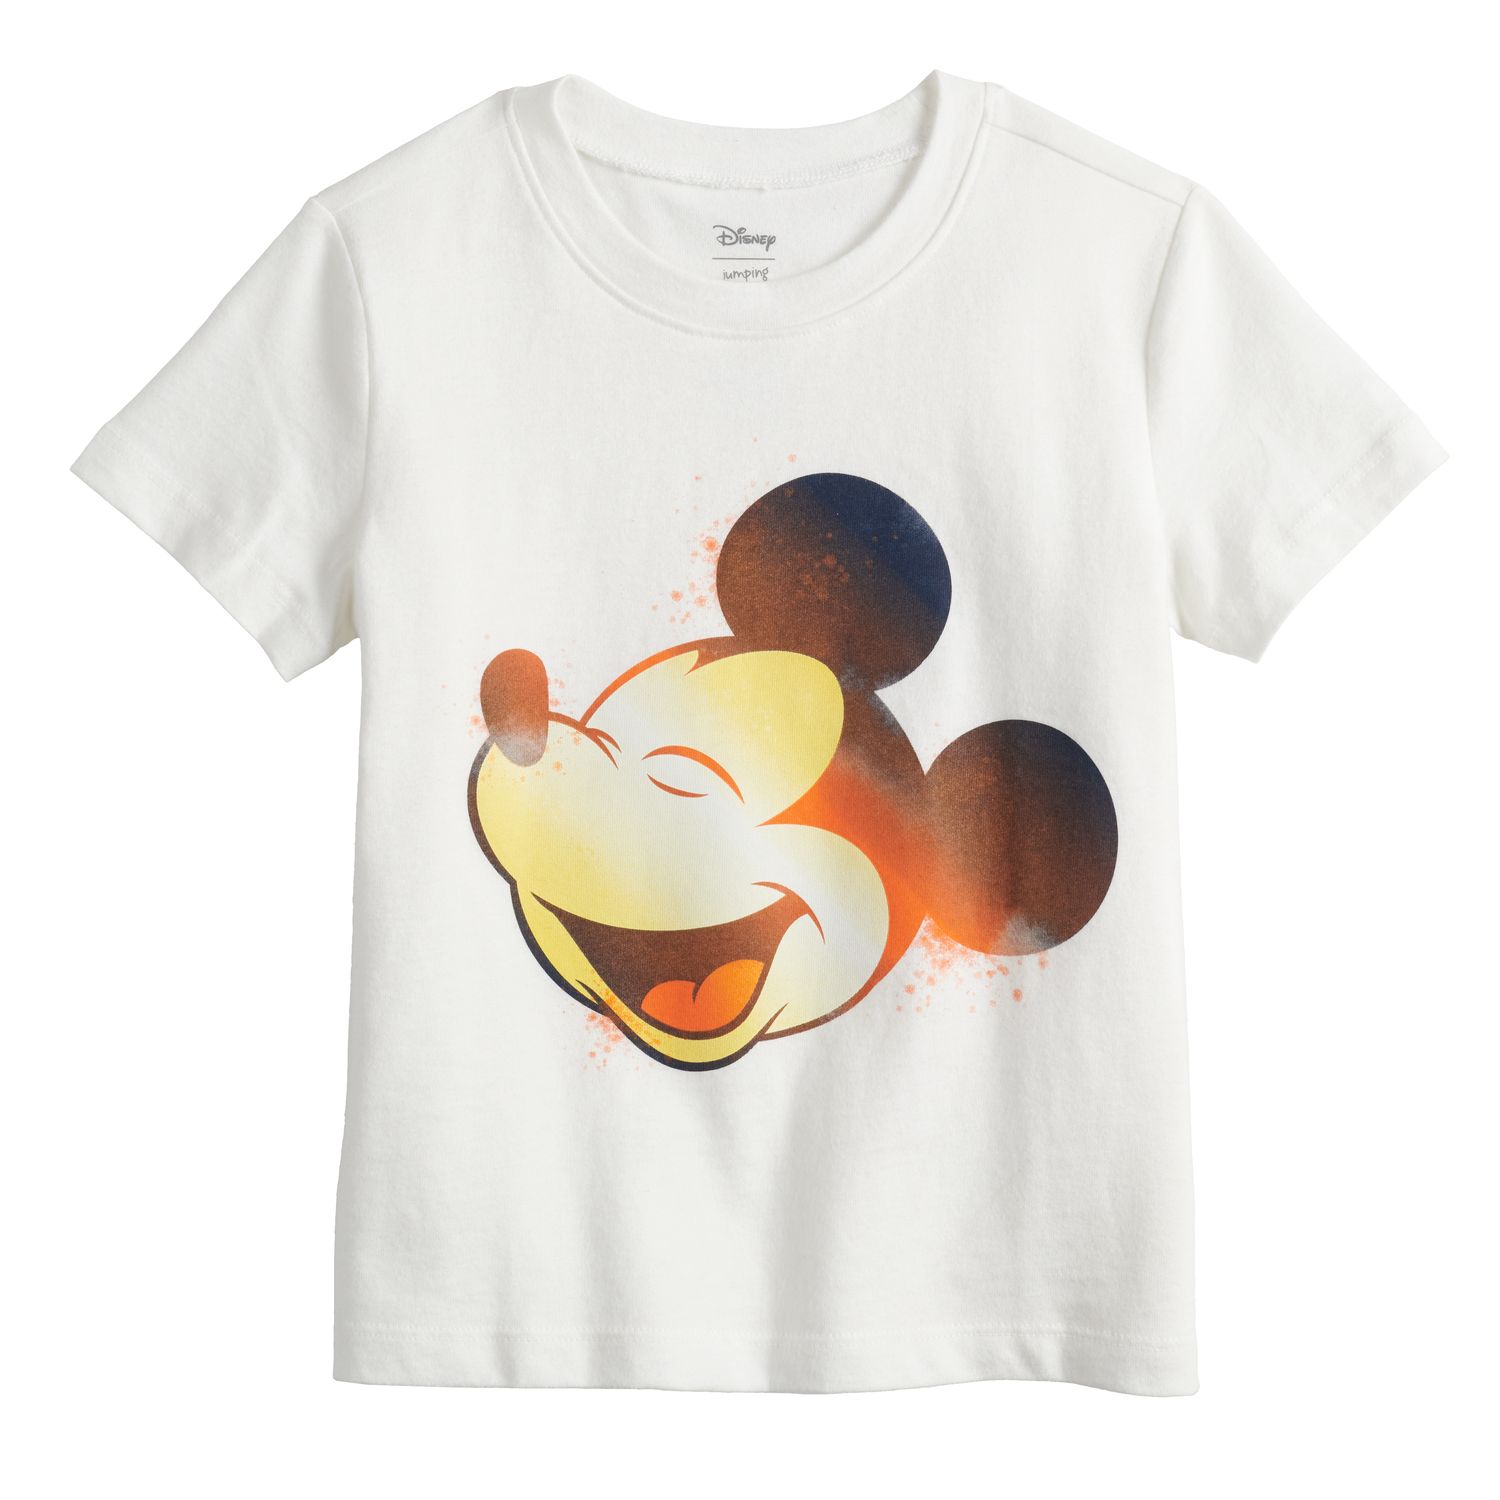 Image for Disney/Jumping Beans Disney's Mickey Mouse Toddler Boy / Boys 4-12 Adaptive Double Layer Tee by Jumping Beans® at Kohl's.